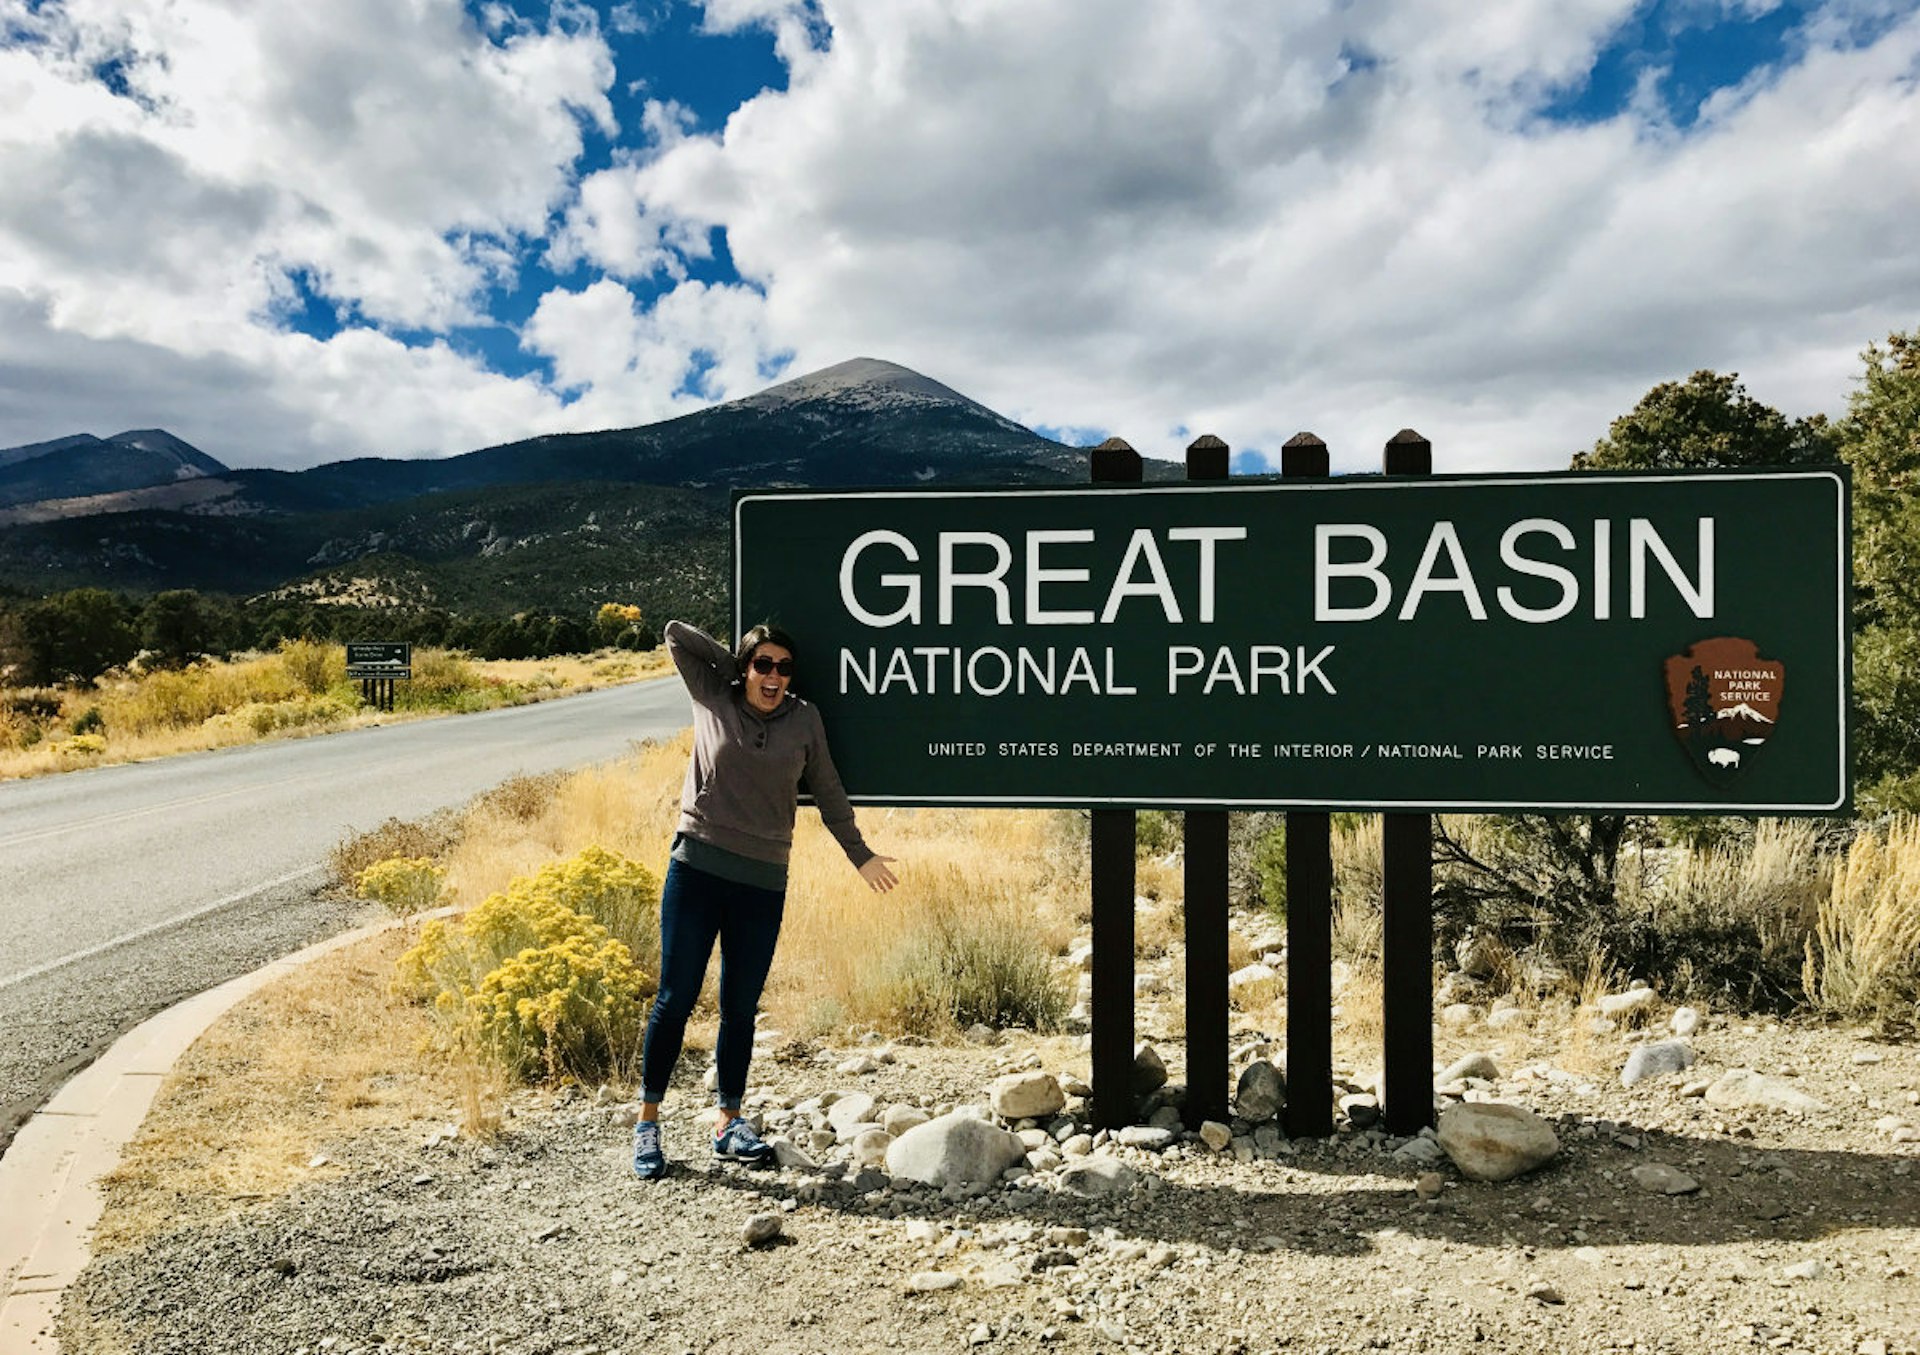 A large sign next to a deserted road stating "Great Basin National Park". A woman stands in front of the sign gesturing and smiling at the camera